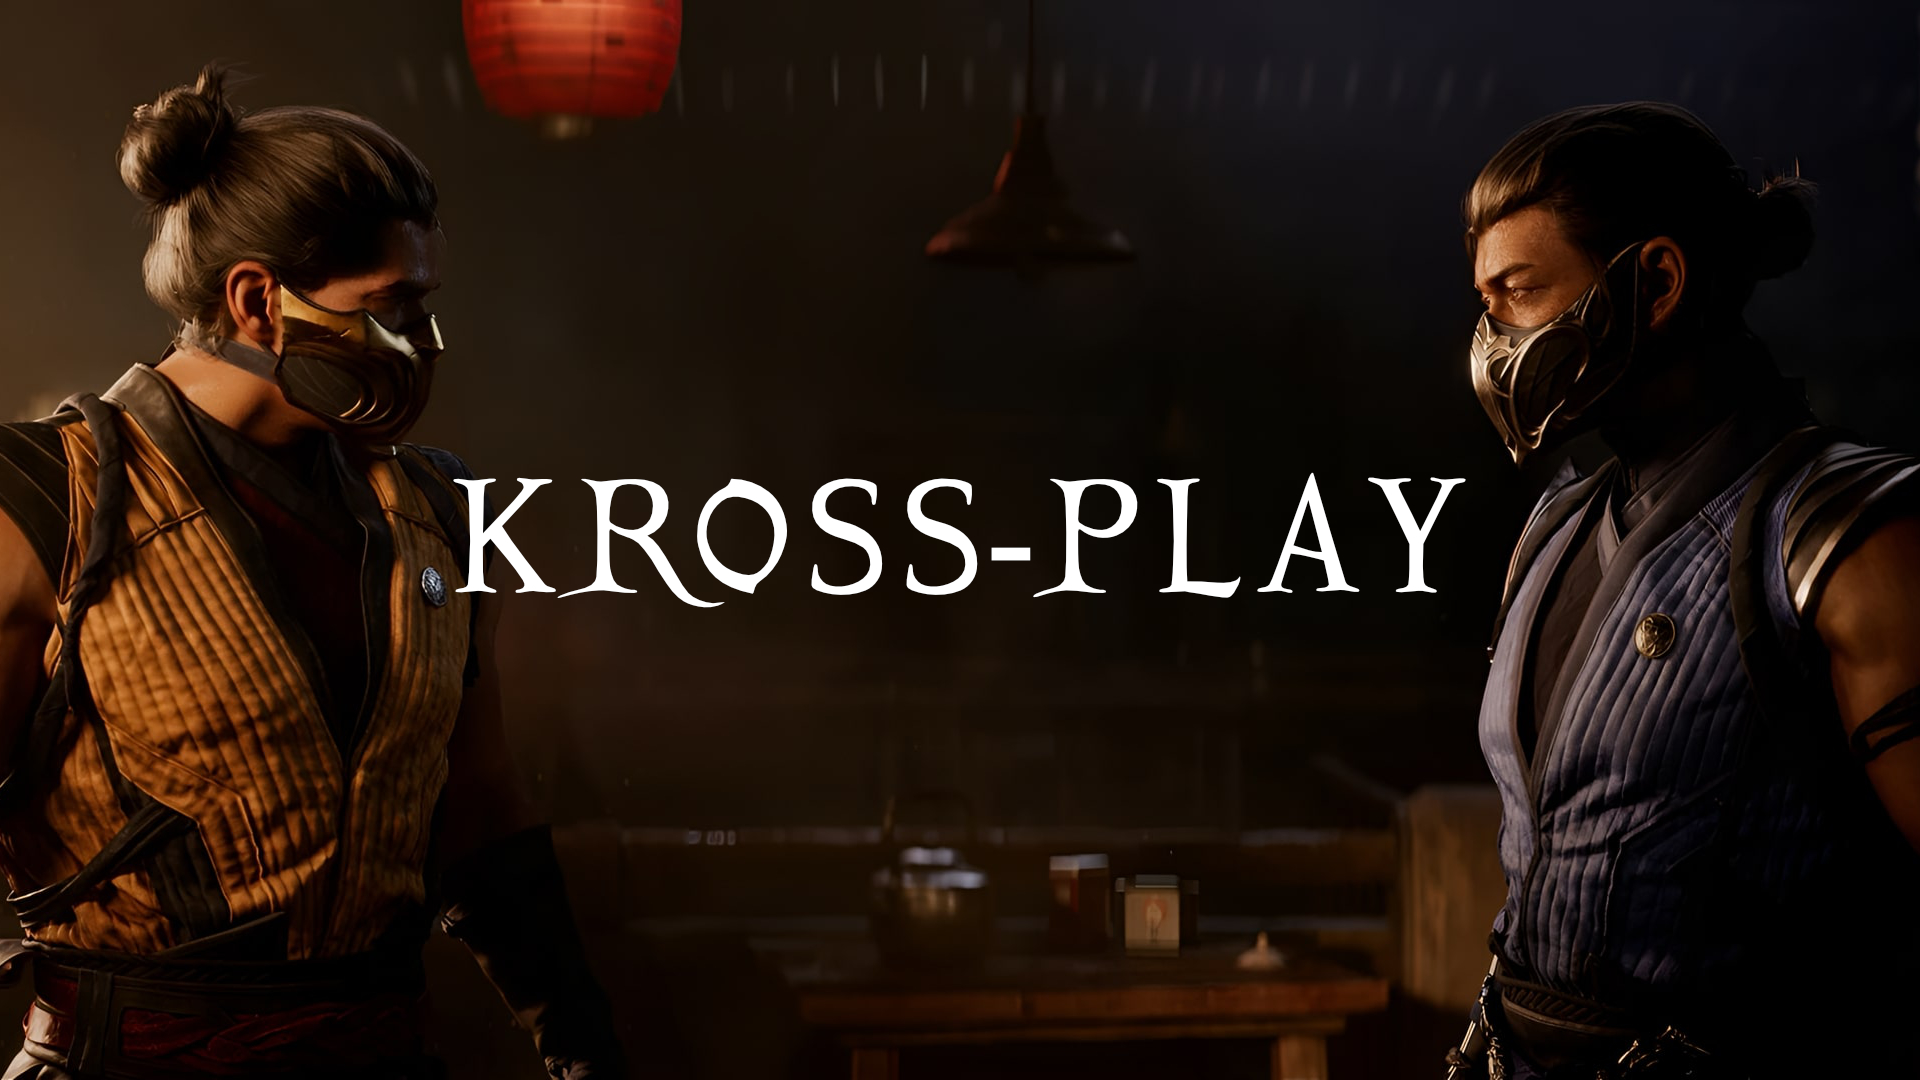 Don't get your hopes up for cross-play in Mortal Kombat 1 at launch